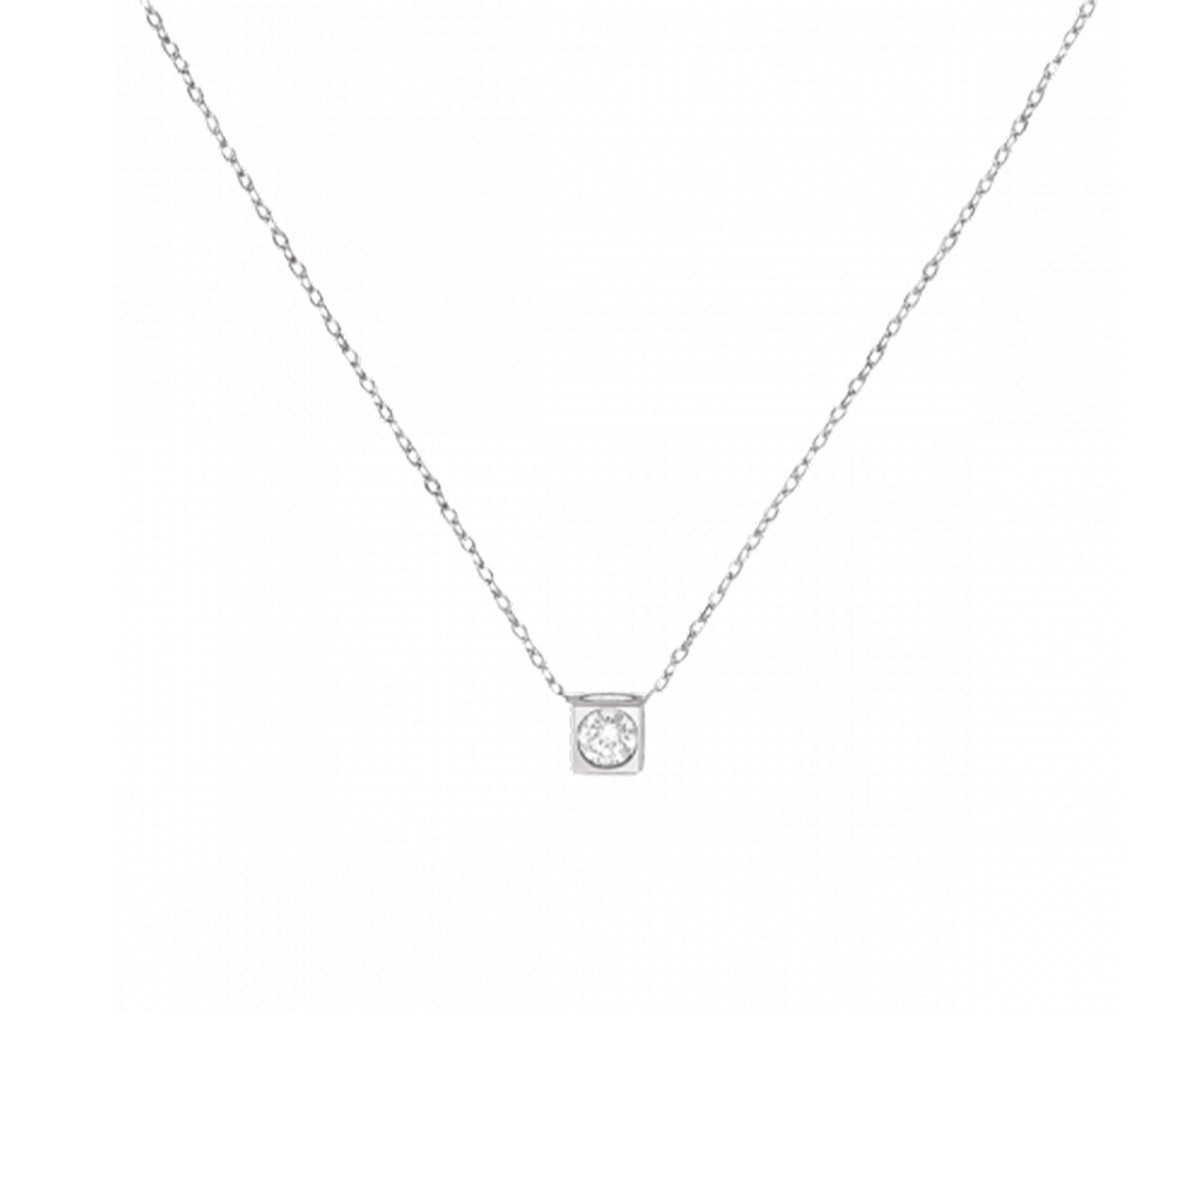 Dinh Van Le Cube 18K White Gold and Diamond Necklace-42002